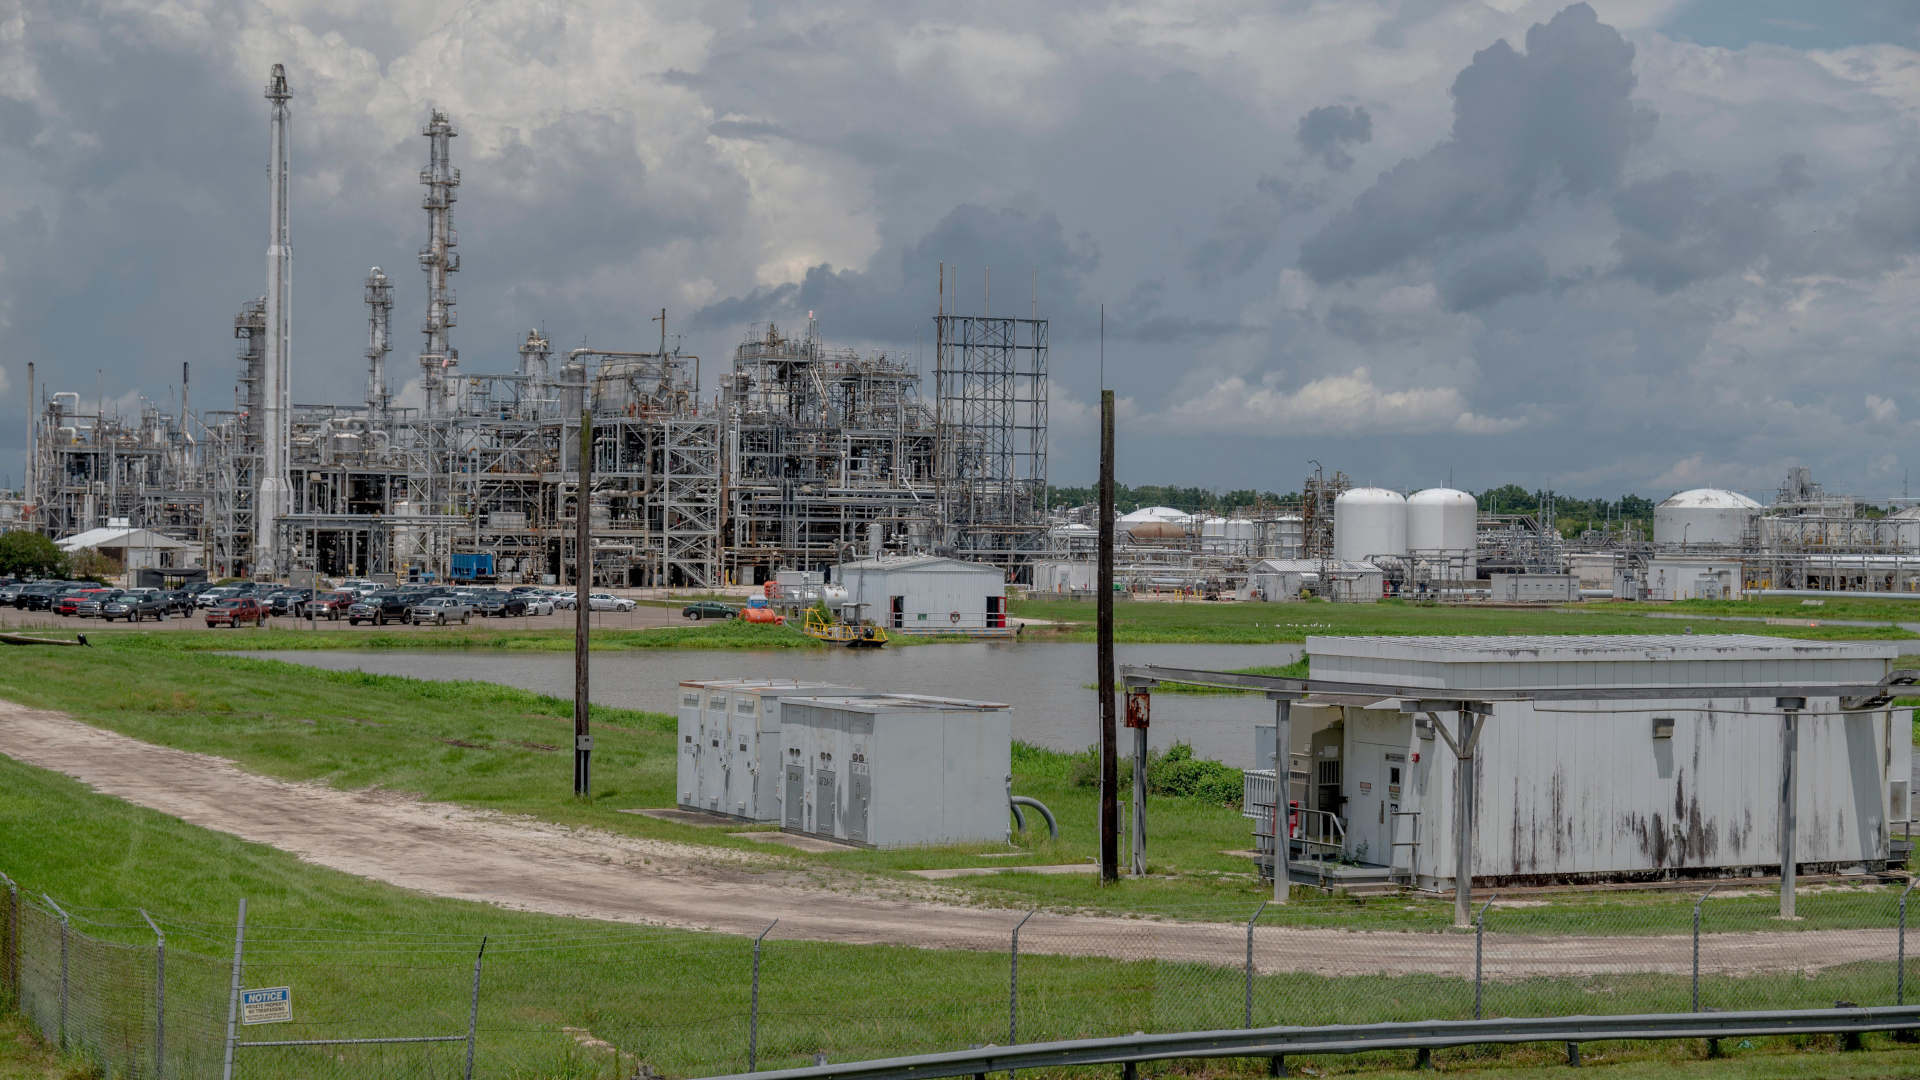 A Denka factory in Reserve, Louisiana, on August 12, 2021. It is one of scores of refineries and petrochemical plants that contribute to toxic pollution along Cancer Alley.